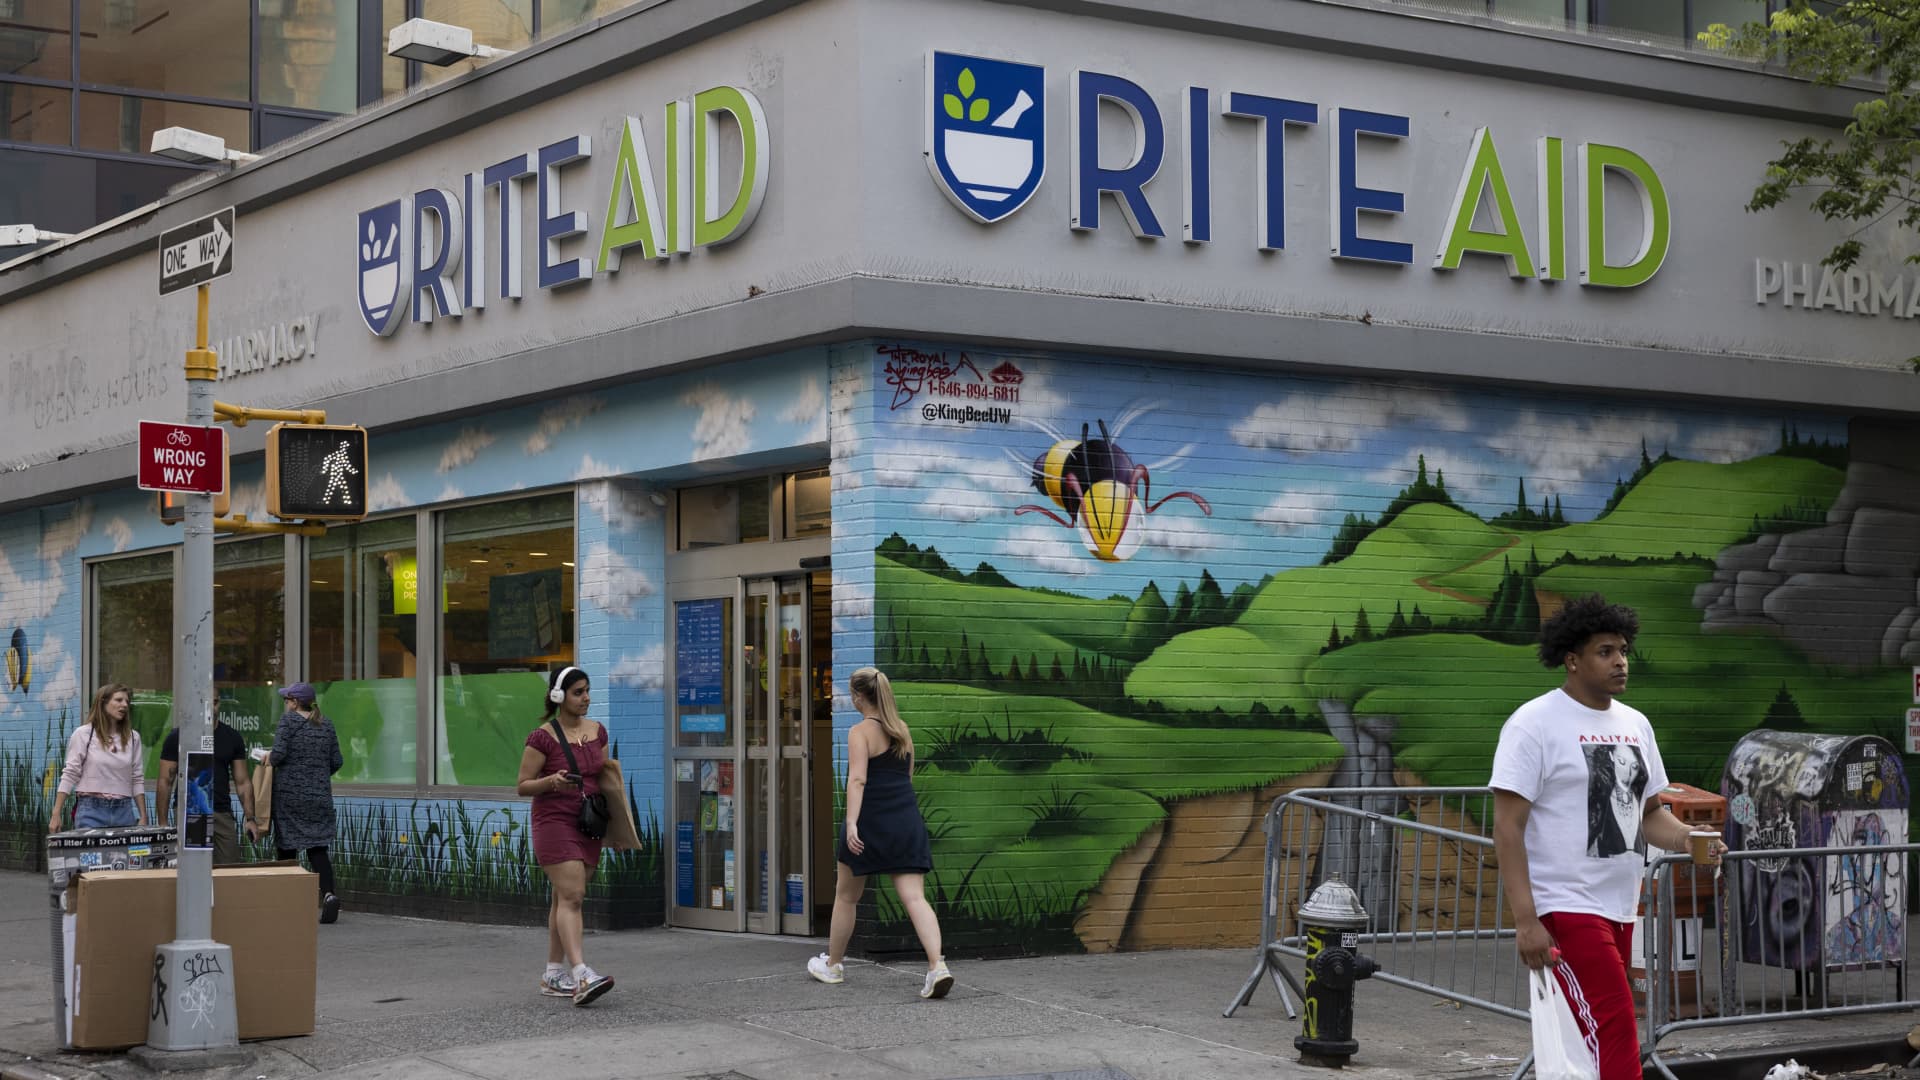 Rite Aid files for bankruptcy amid slowing sales, opioid litigation